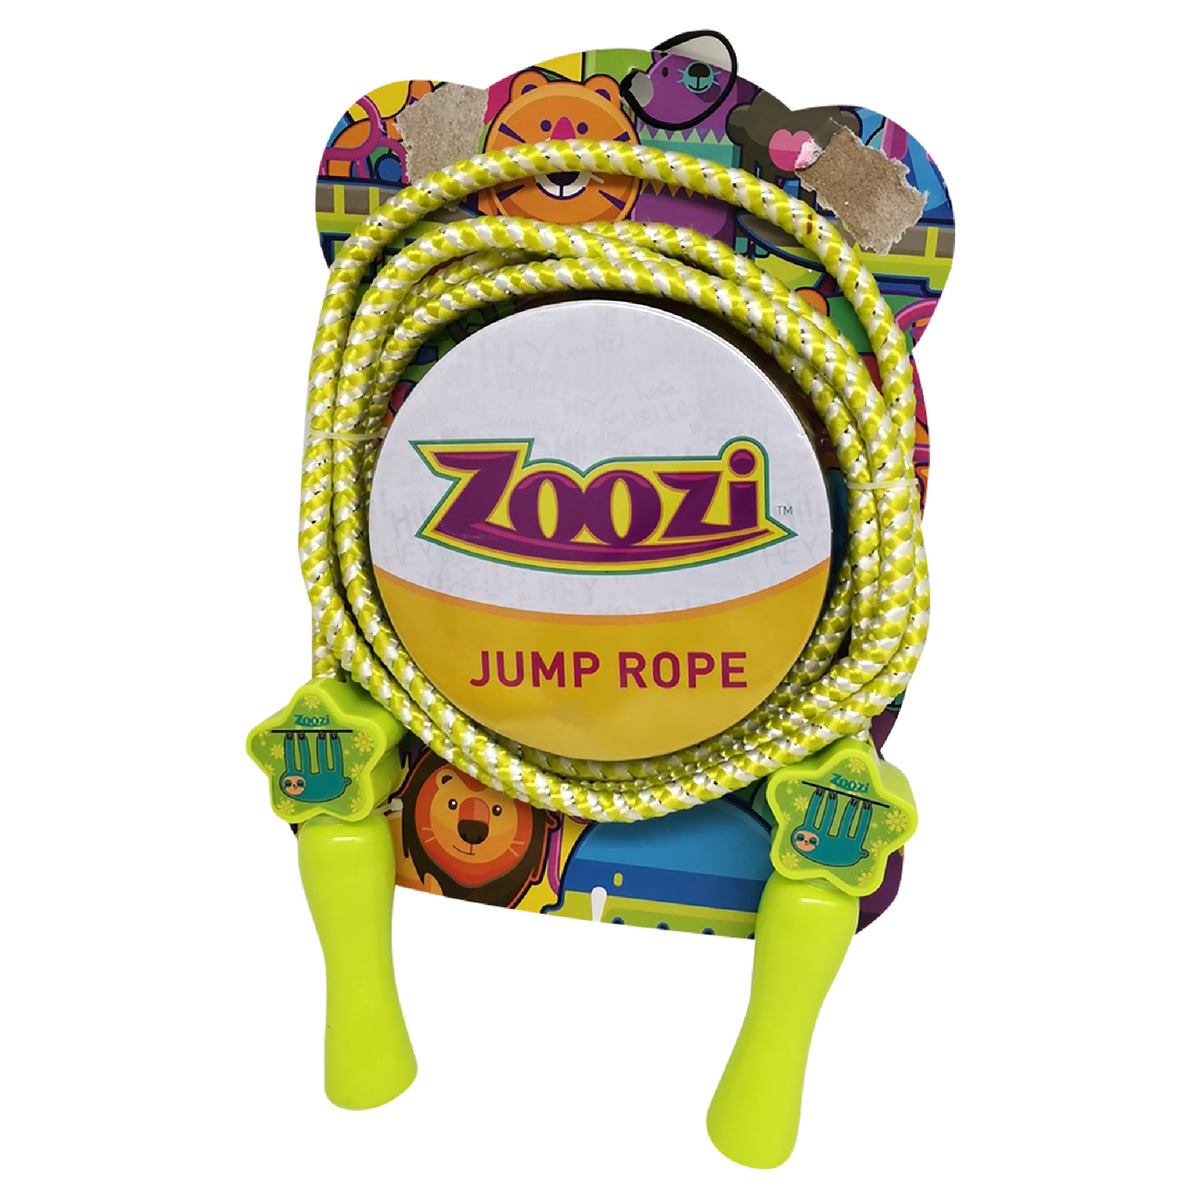 Zoozi Jumping Rope Z1015-S price in Doha Qatar